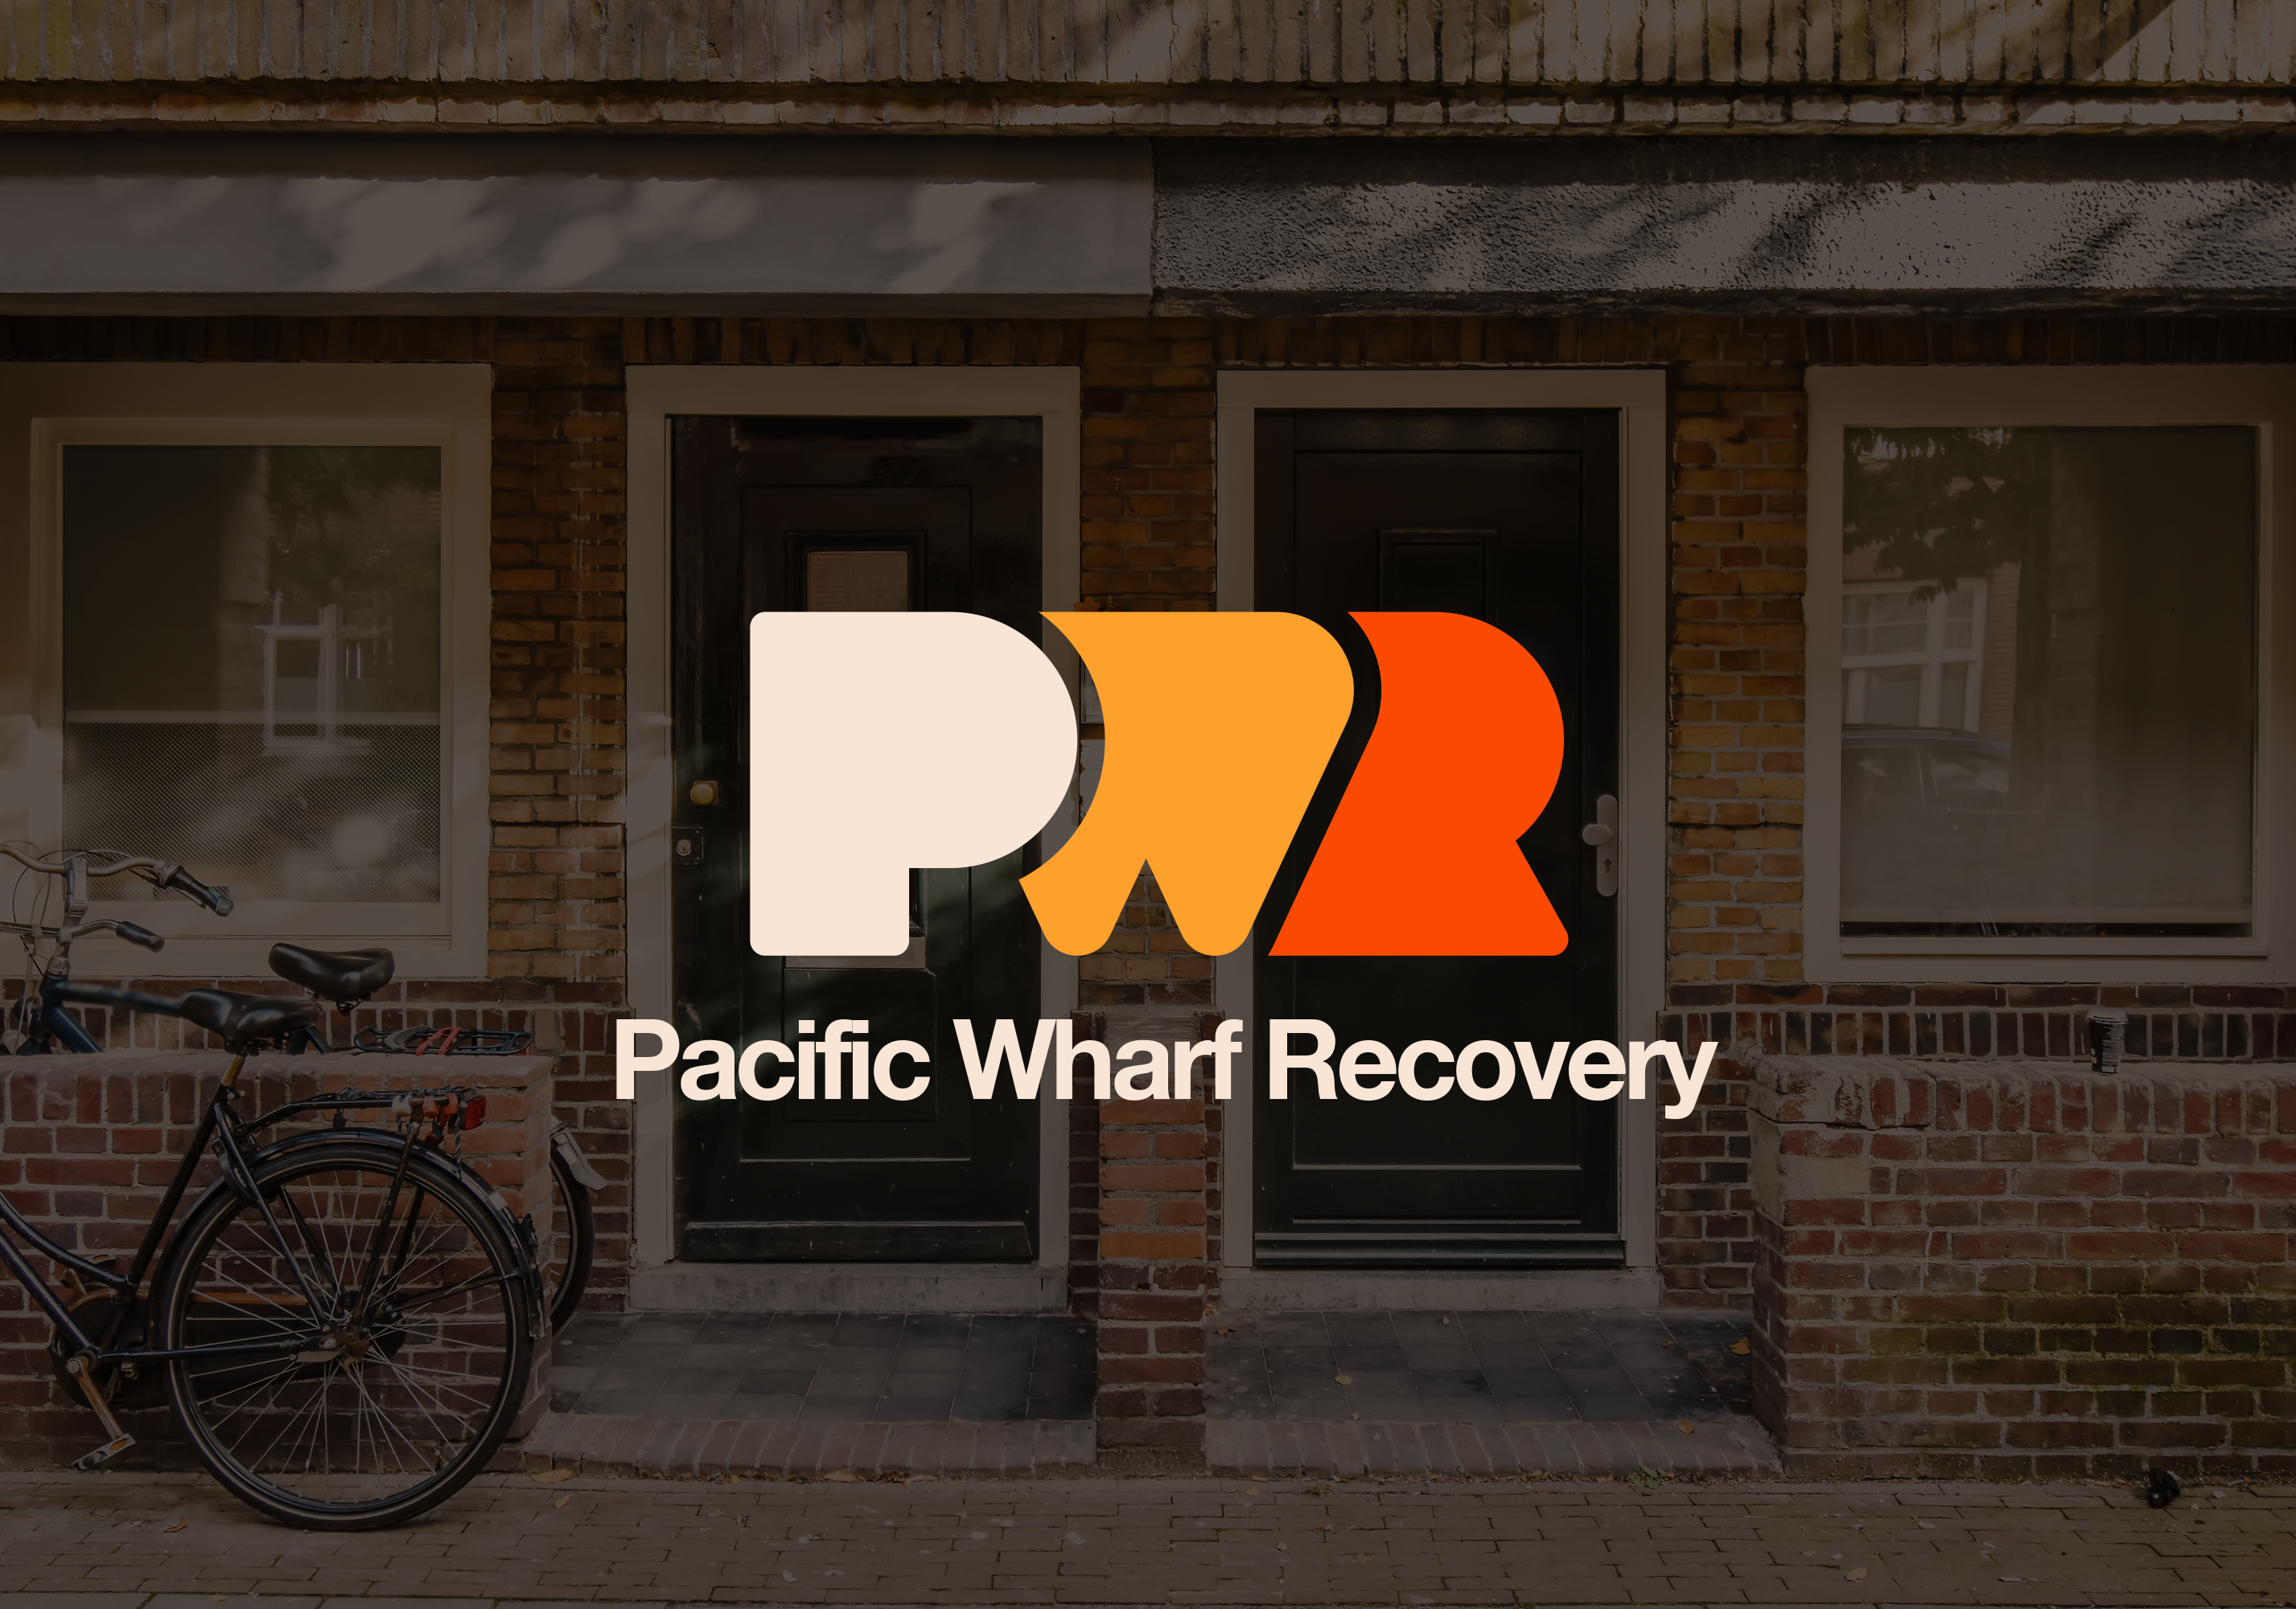 PWR Logo overlayed on an image of a house